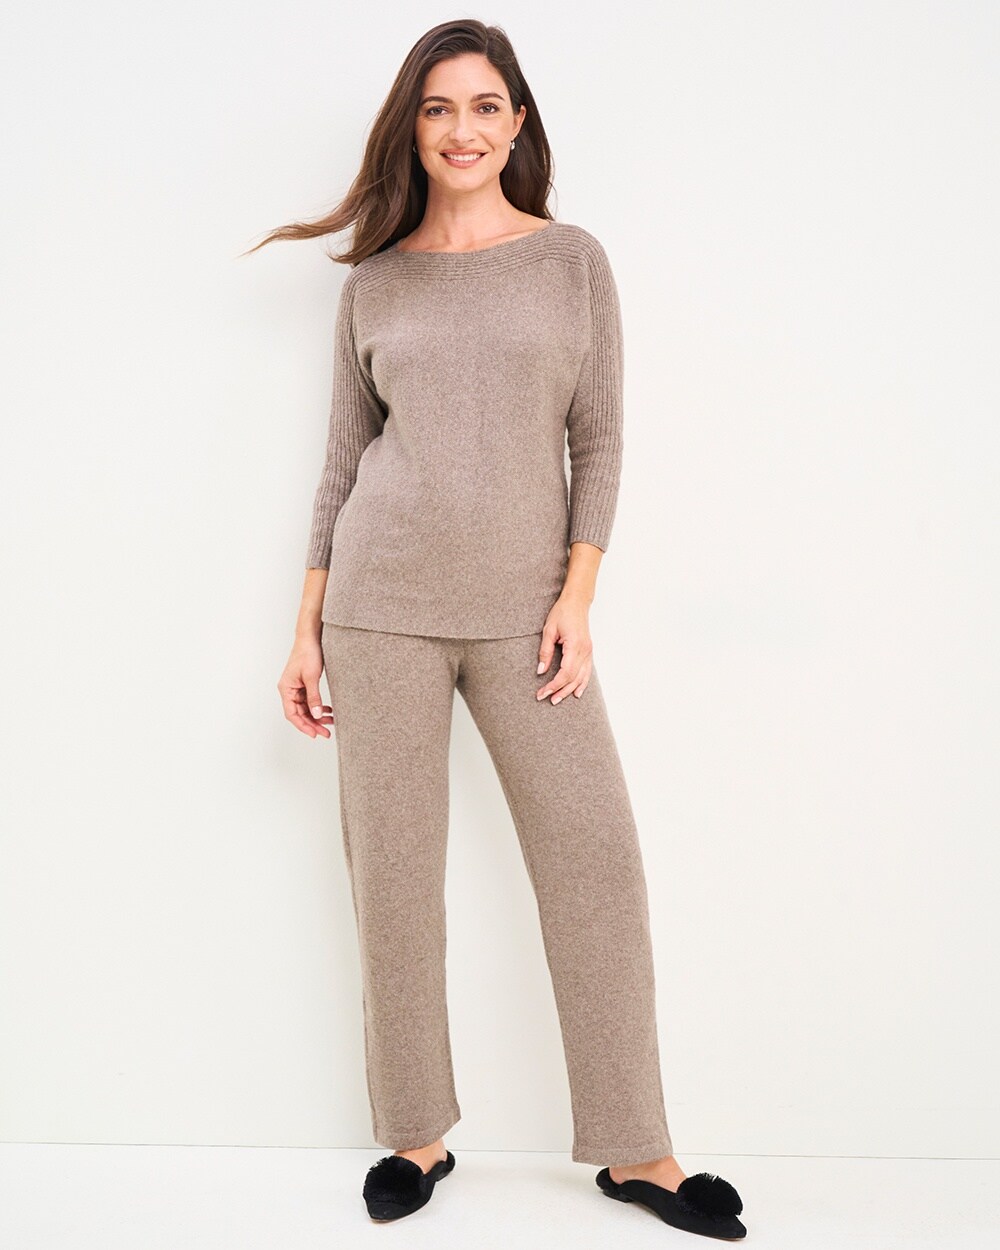 Weekends Pull-On Sweater Pants